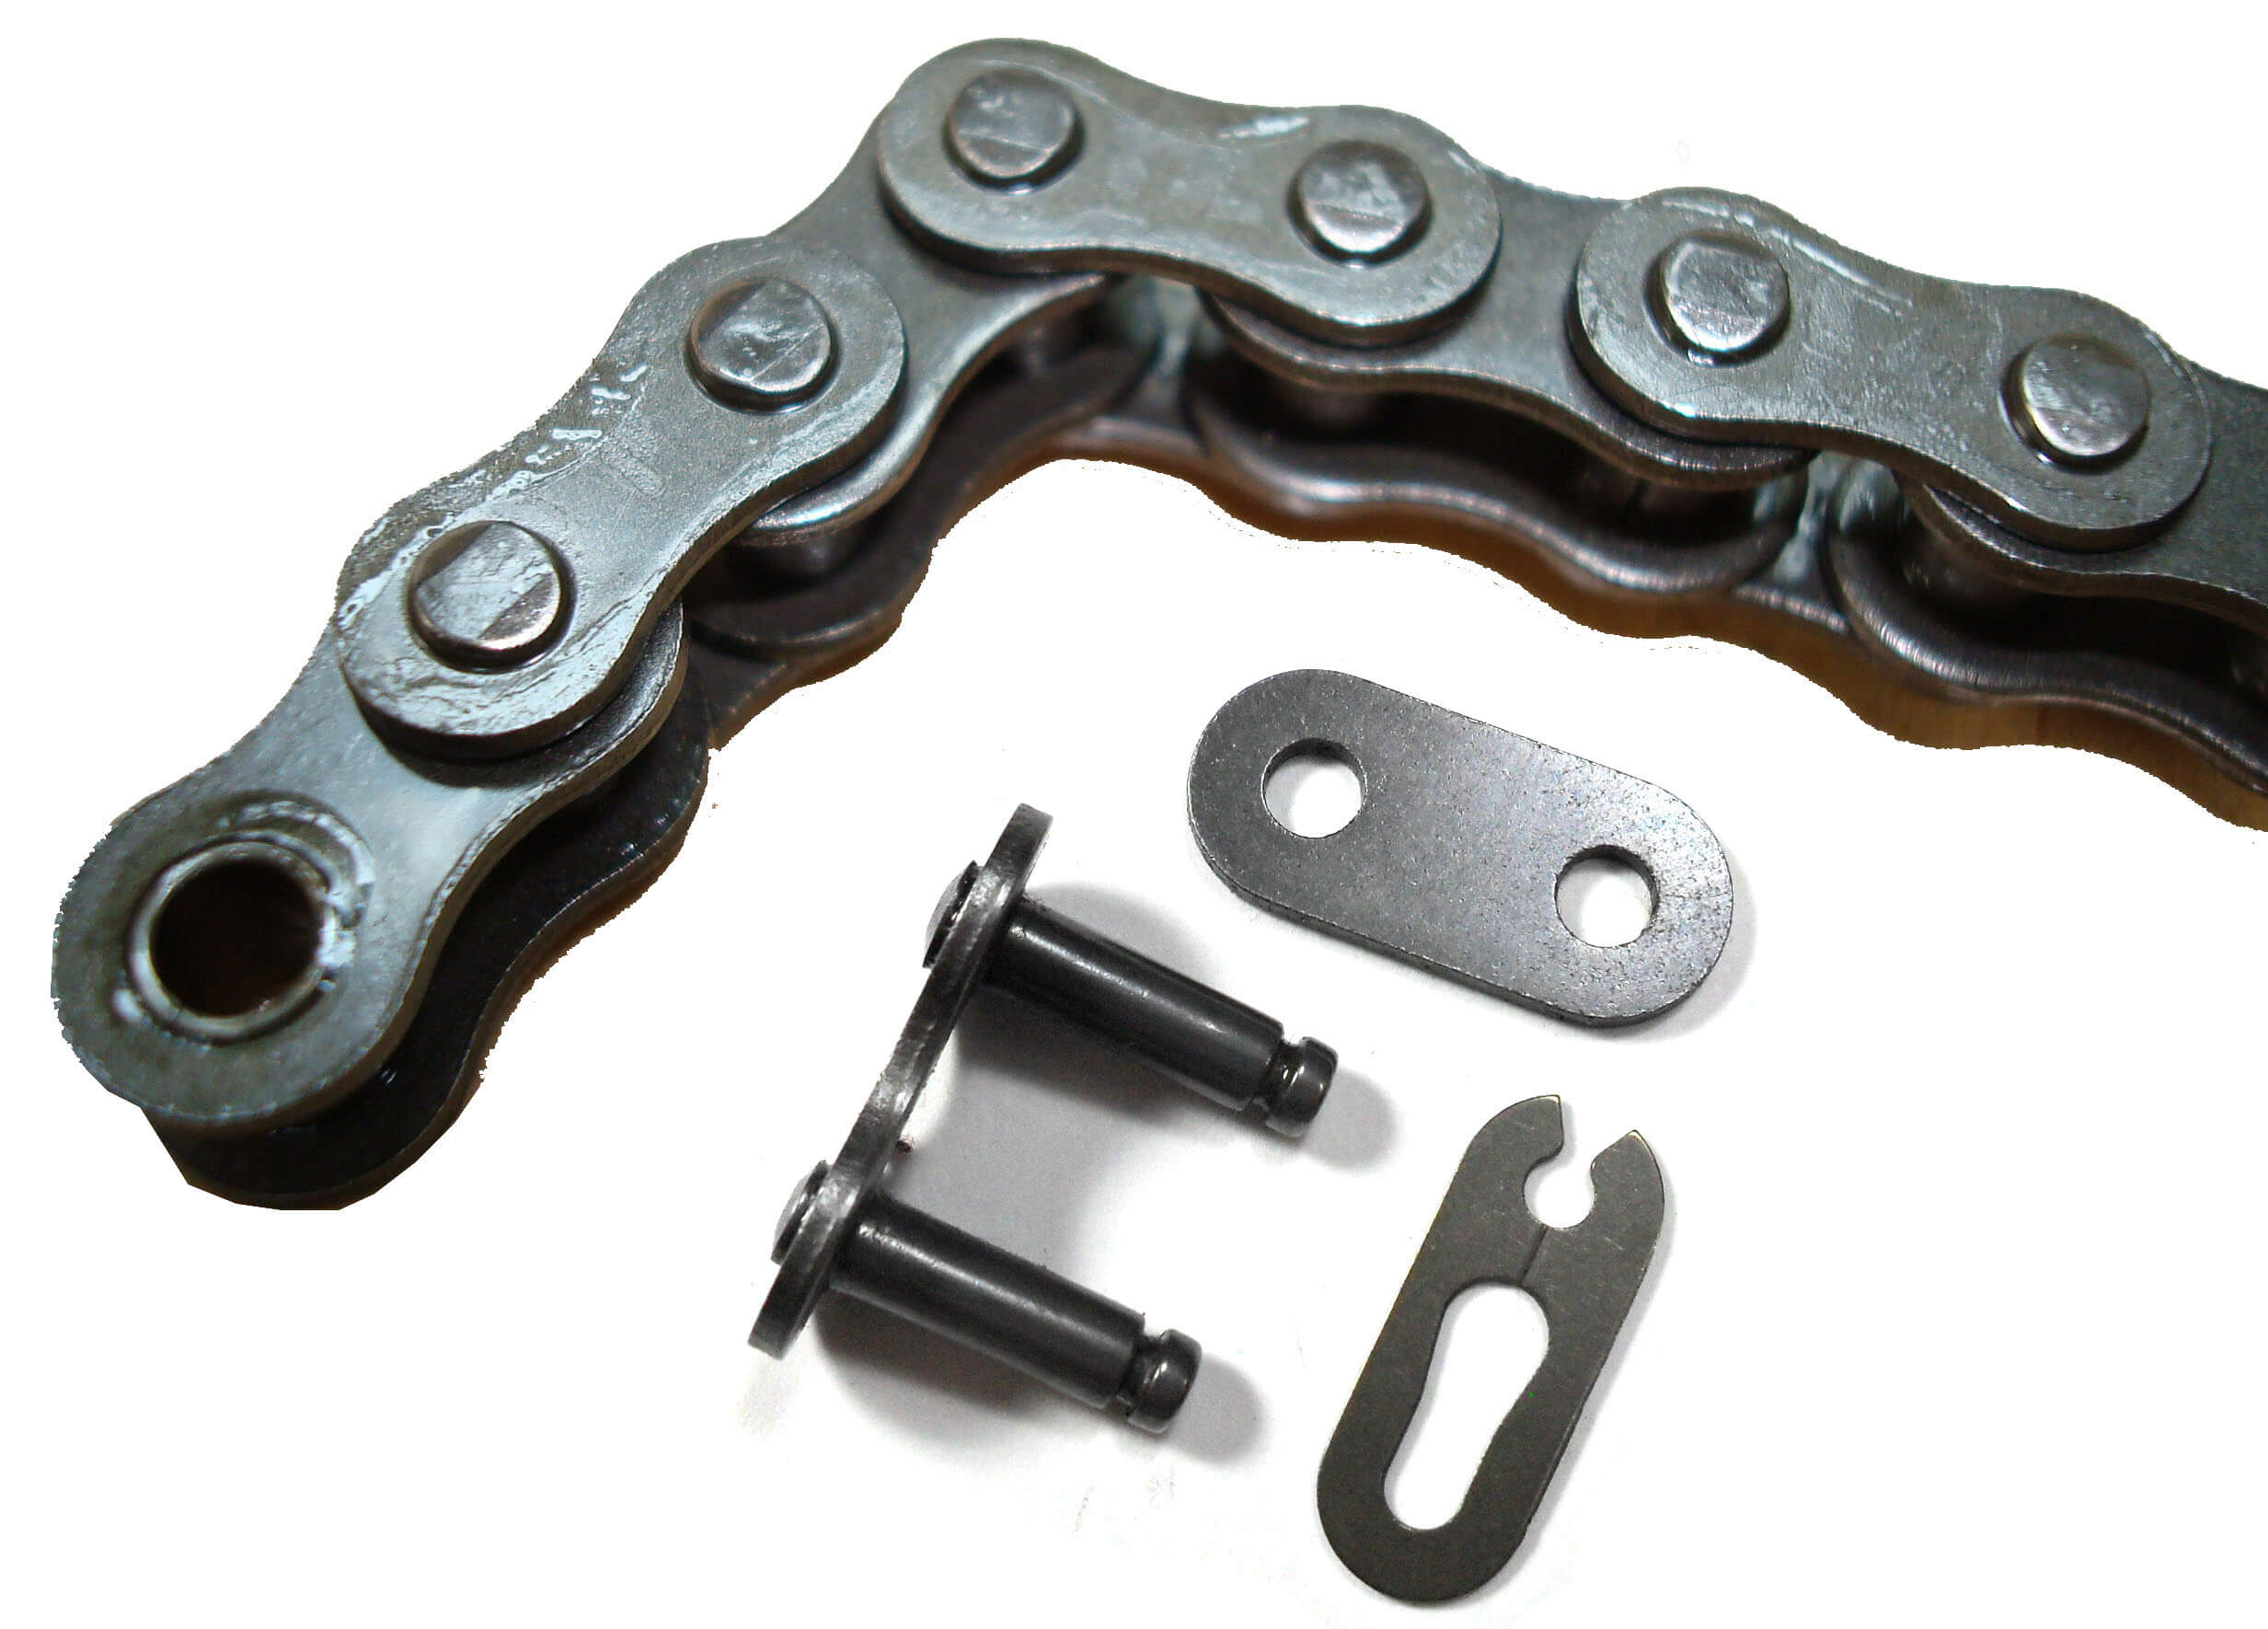 Chain #420 x 74L With Master Link Fits Tao Tao Boulder, B1, Coolster, 110-125cc ATVs + many more.